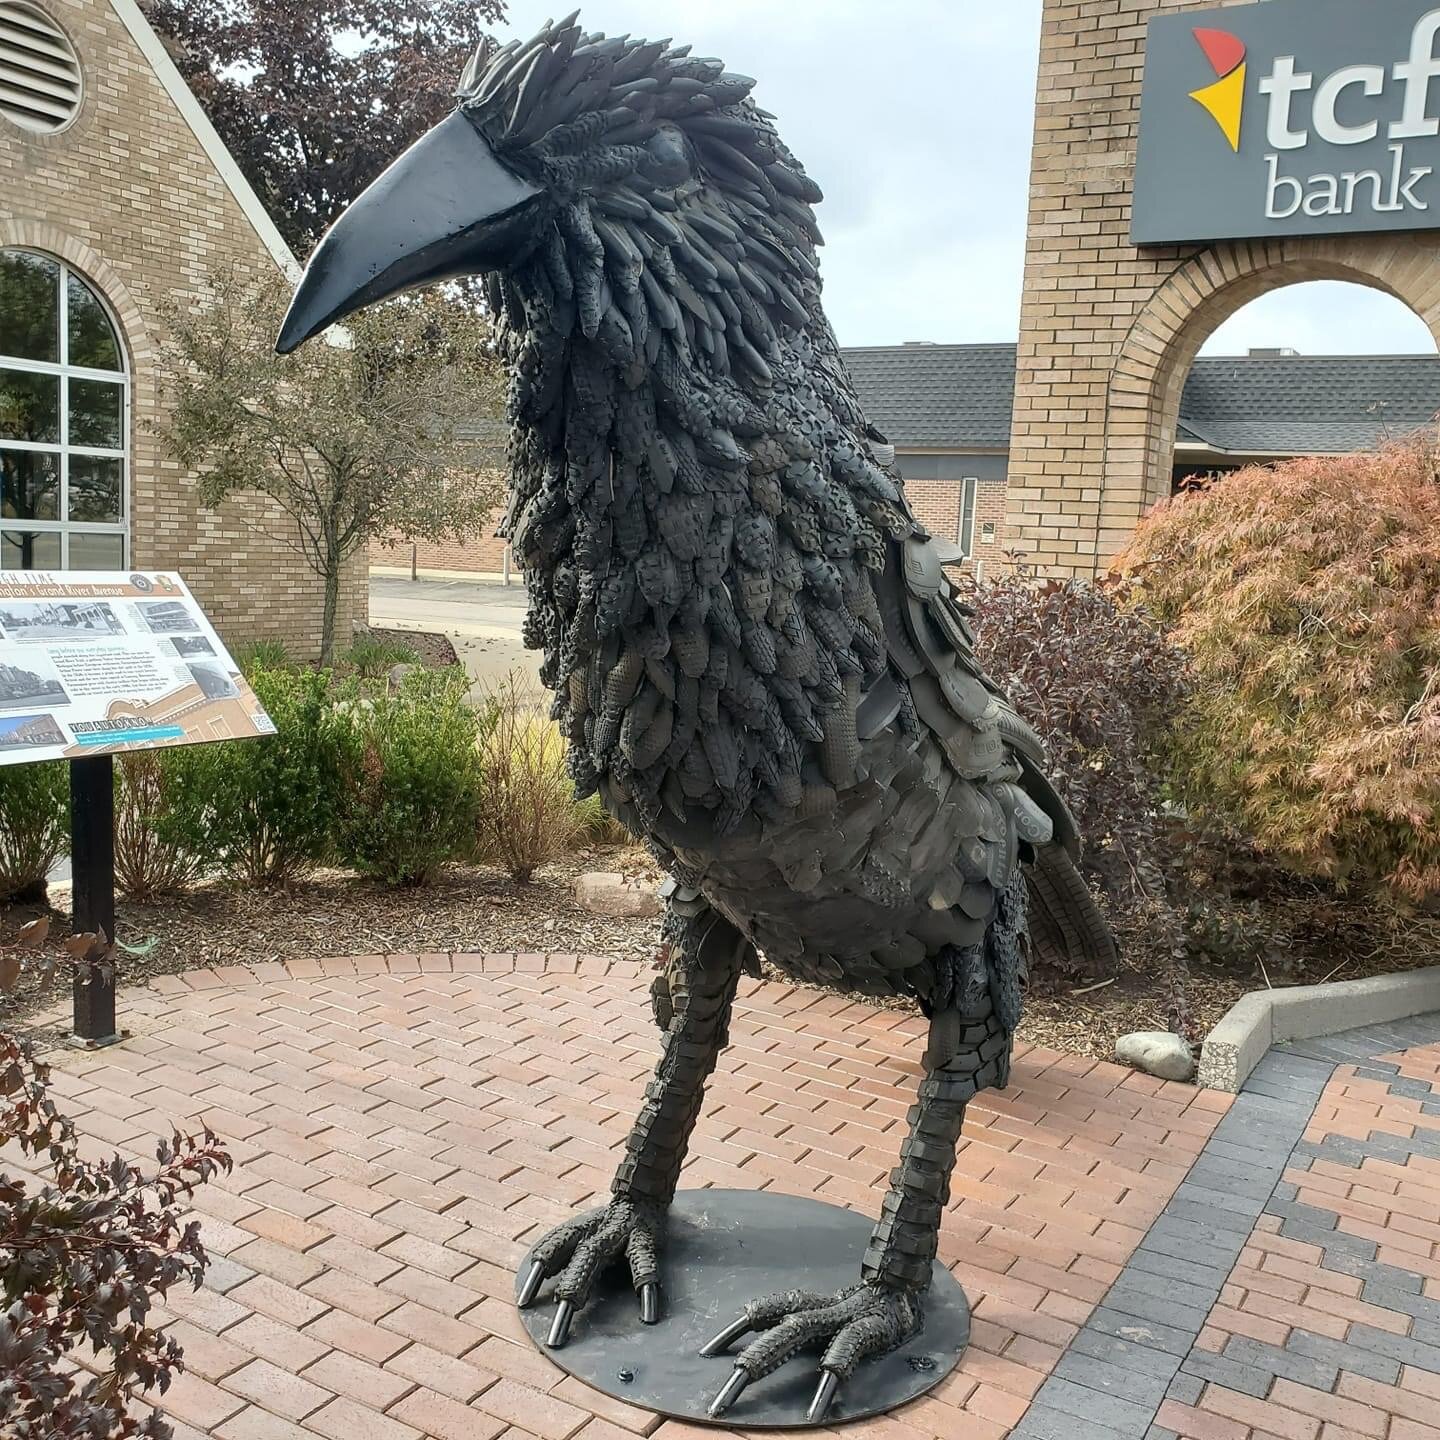 The “Old Tired Crow” arrived in downtown Farmington earlier this month